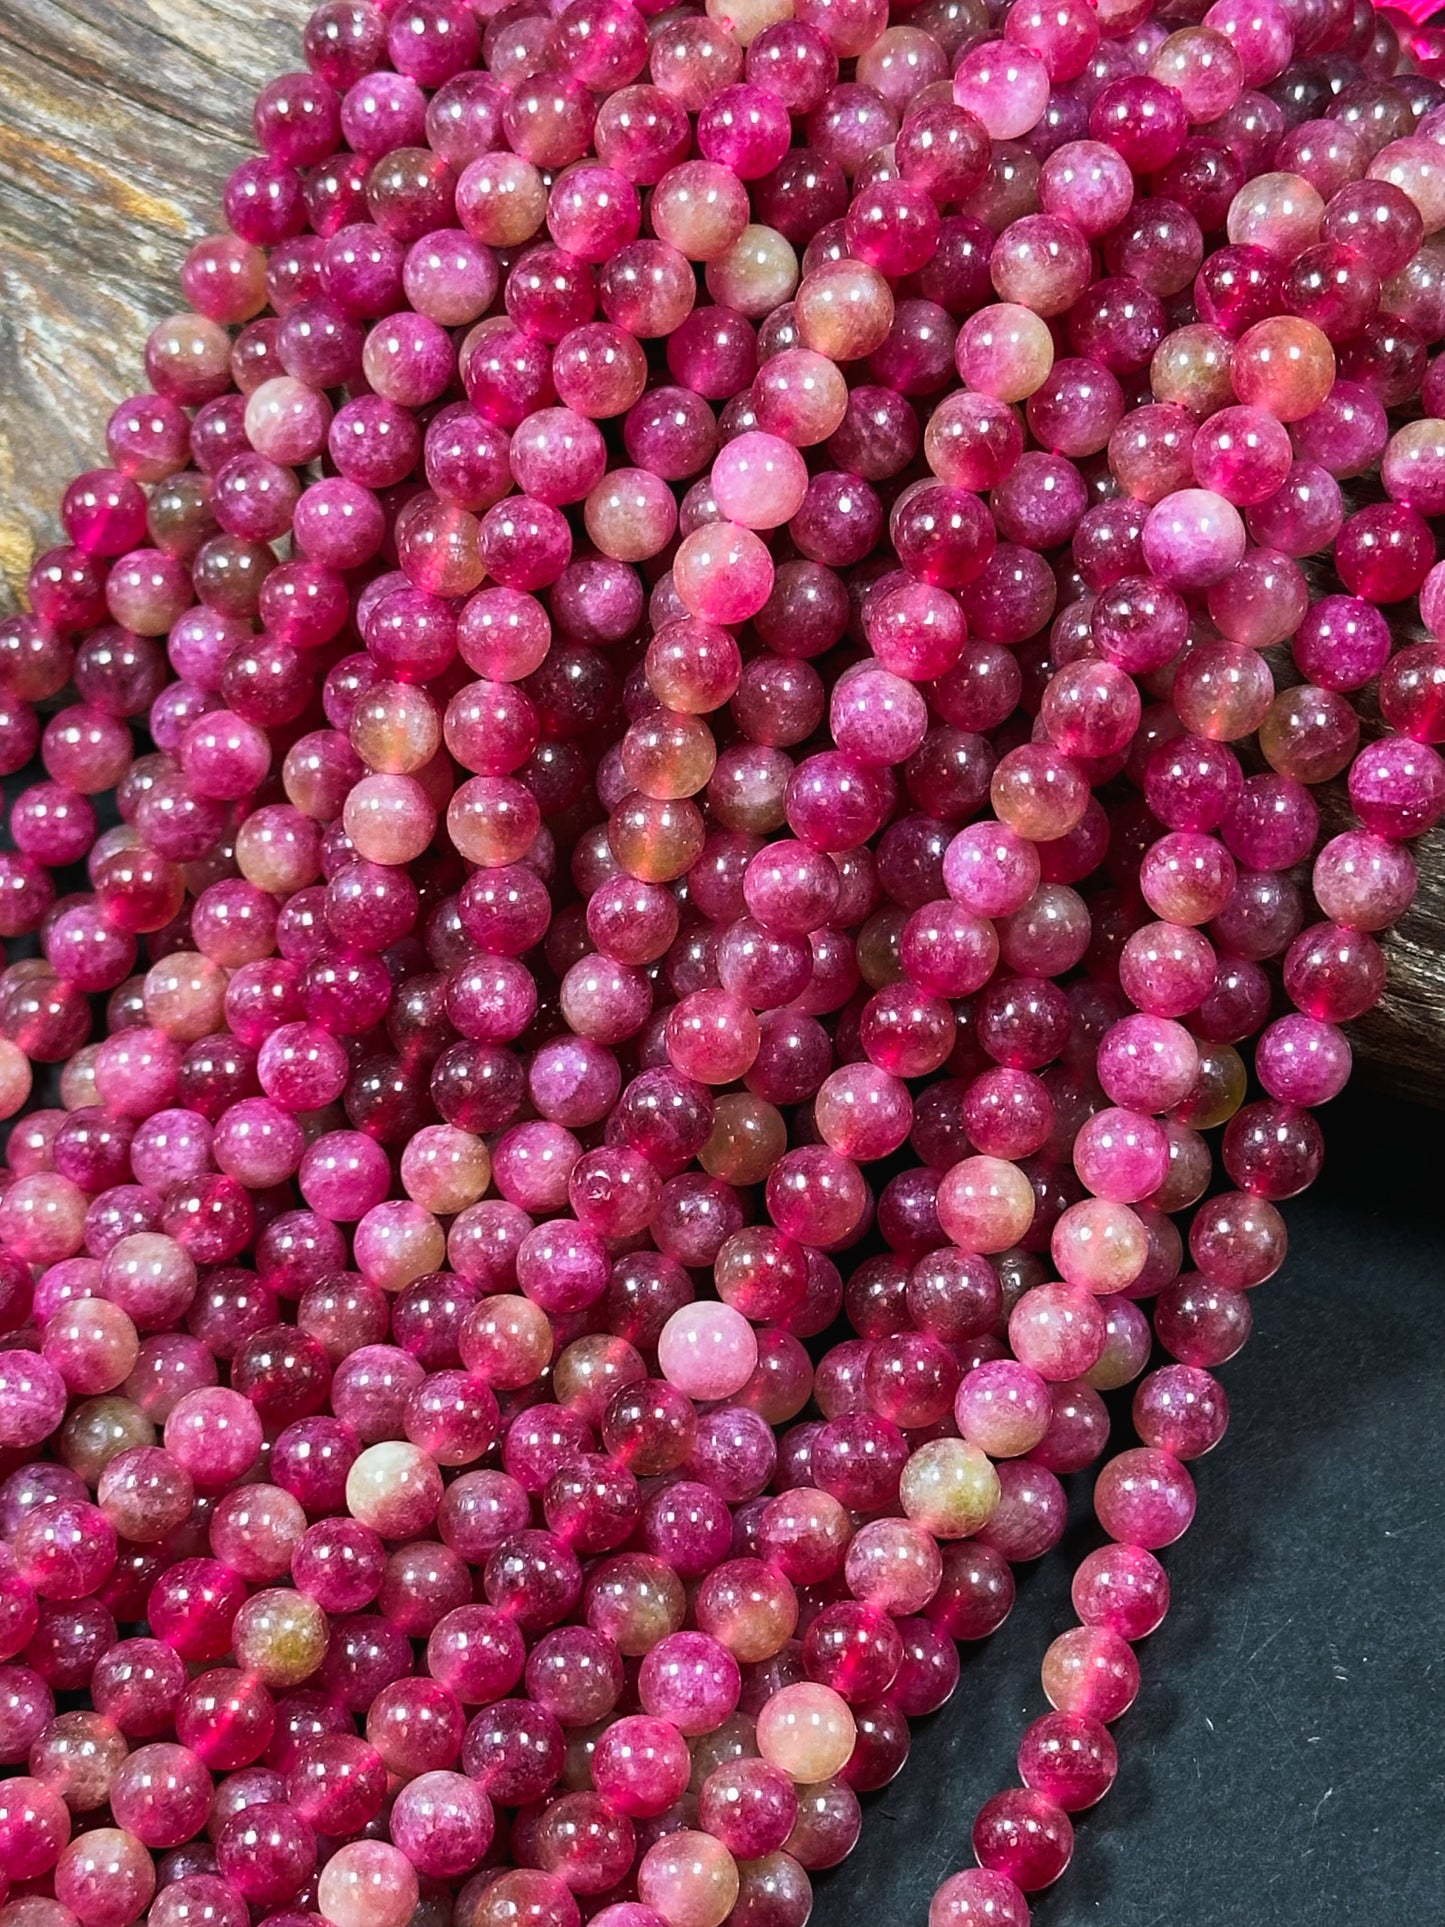 Natural Watermelon Tourmaline Quartz Gemstone Bead Smooth 8mm Round Beads, Beautiful Green Red Color Beads, Great Quality Full Strand 15.5"